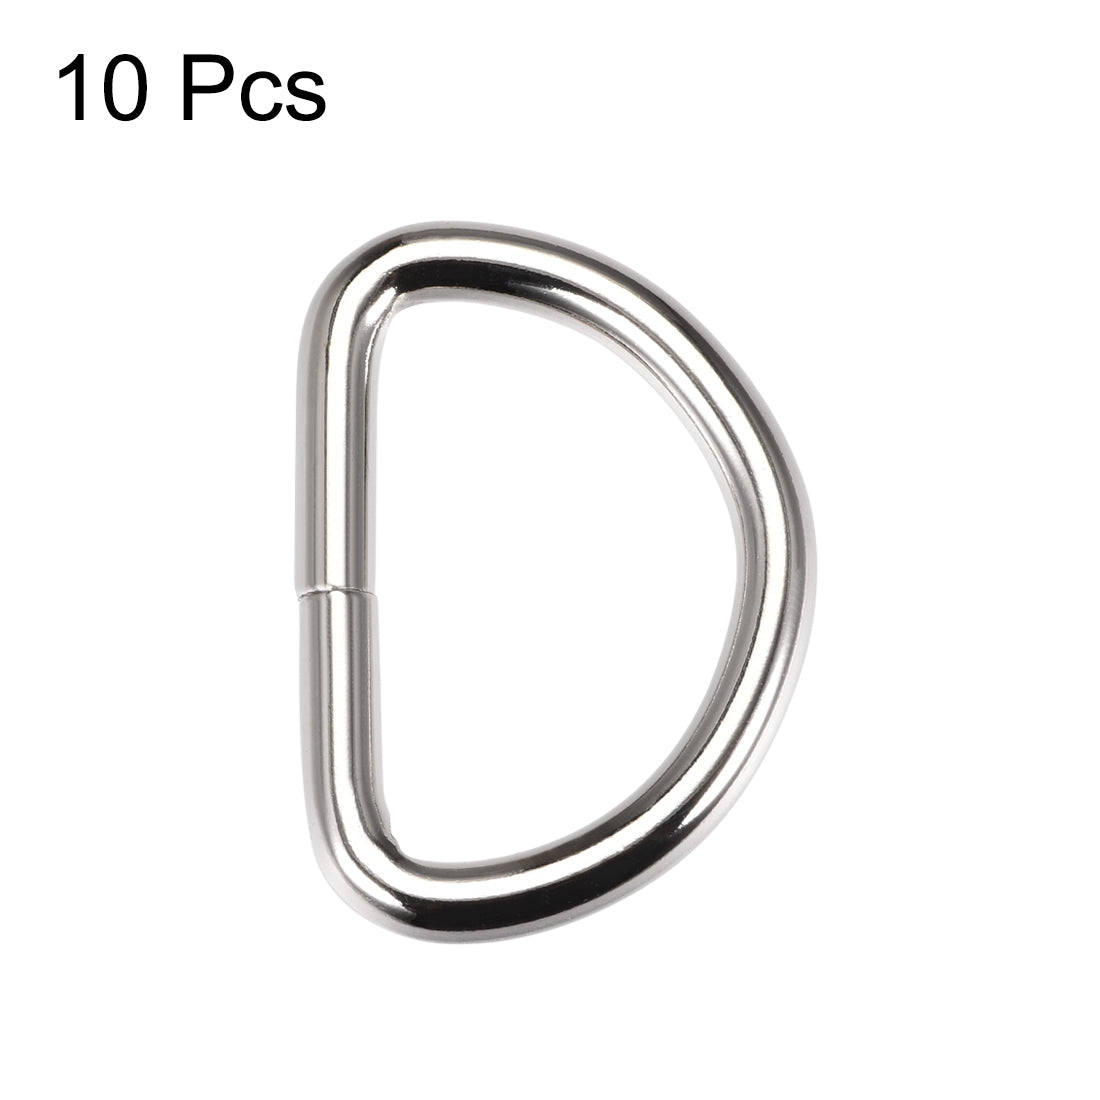 uxcell Uxcell 10 Pcs D Ring Buckle 1.26 Inch Metal Semi-Circular D-Rings Silver Tone for Hardware Bags Belts Craft DIY Accessories